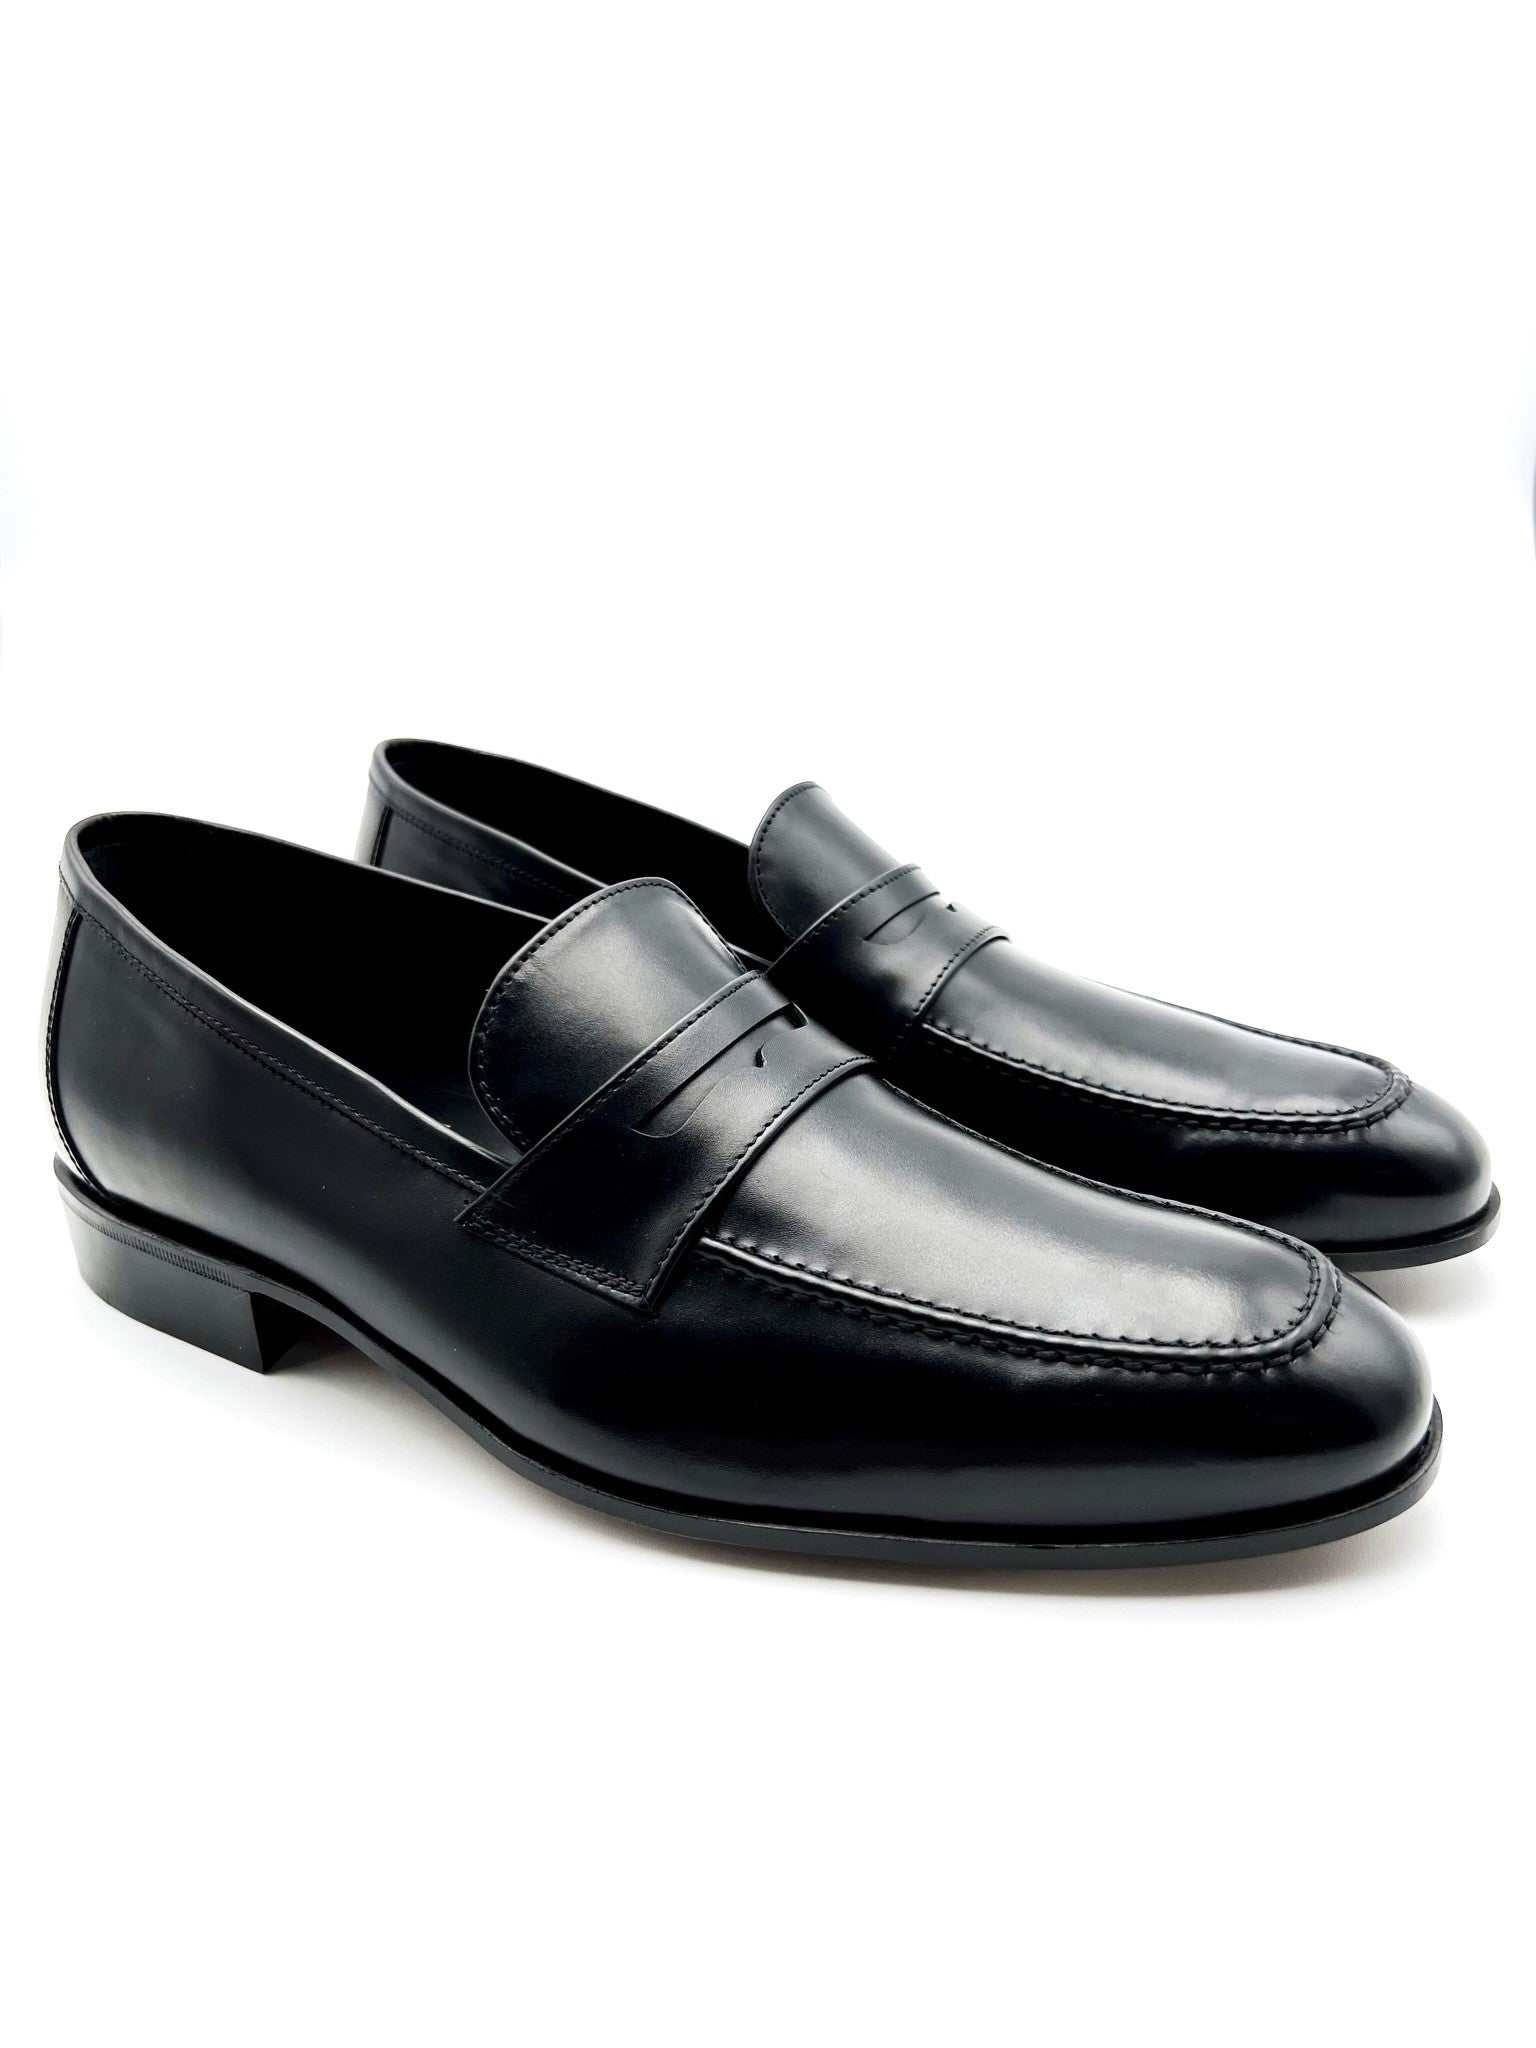 Loafers 100% made in Italy, in full grain calfskin,  with light leather sole, Blake process. Shaped with  regular plant suitable for a wide audience. Black color.  These shoes are comfortable and classy and are  artisanally made with genuine Italian leather. Process: blake - Leather: calfskin leather -  Color: black - Lining: Black Calf -  Bottom: closed leather -  Insole: leather Handcrafted shoes, made in Italy with  genuine 100% - Sartoria Dei Duchi-Atri